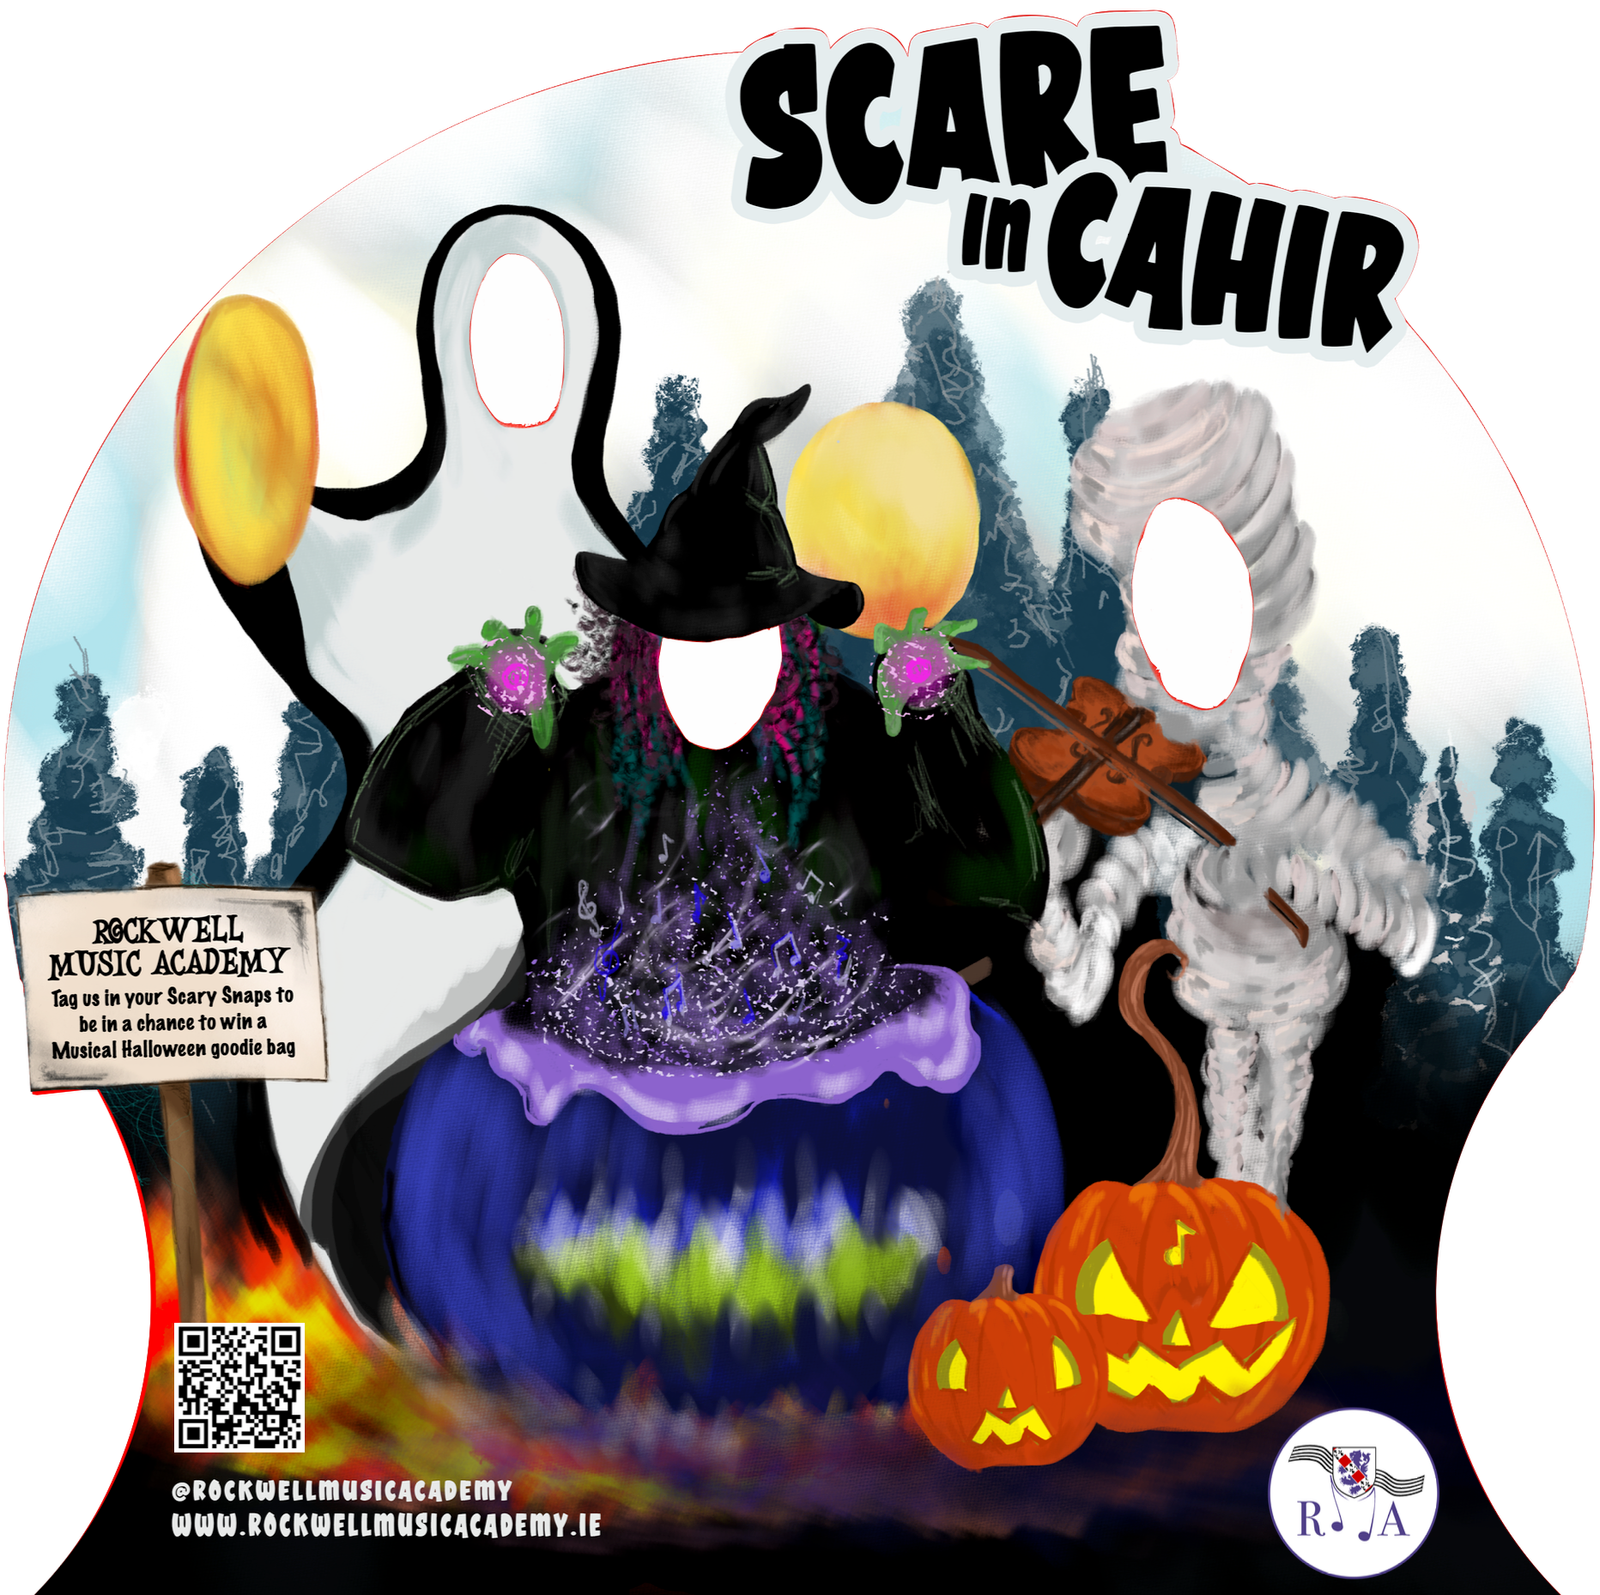 Scare in Cahir artwork for Rockwell Music Academy by Eamonn B Shanahan for Pinstripe Media